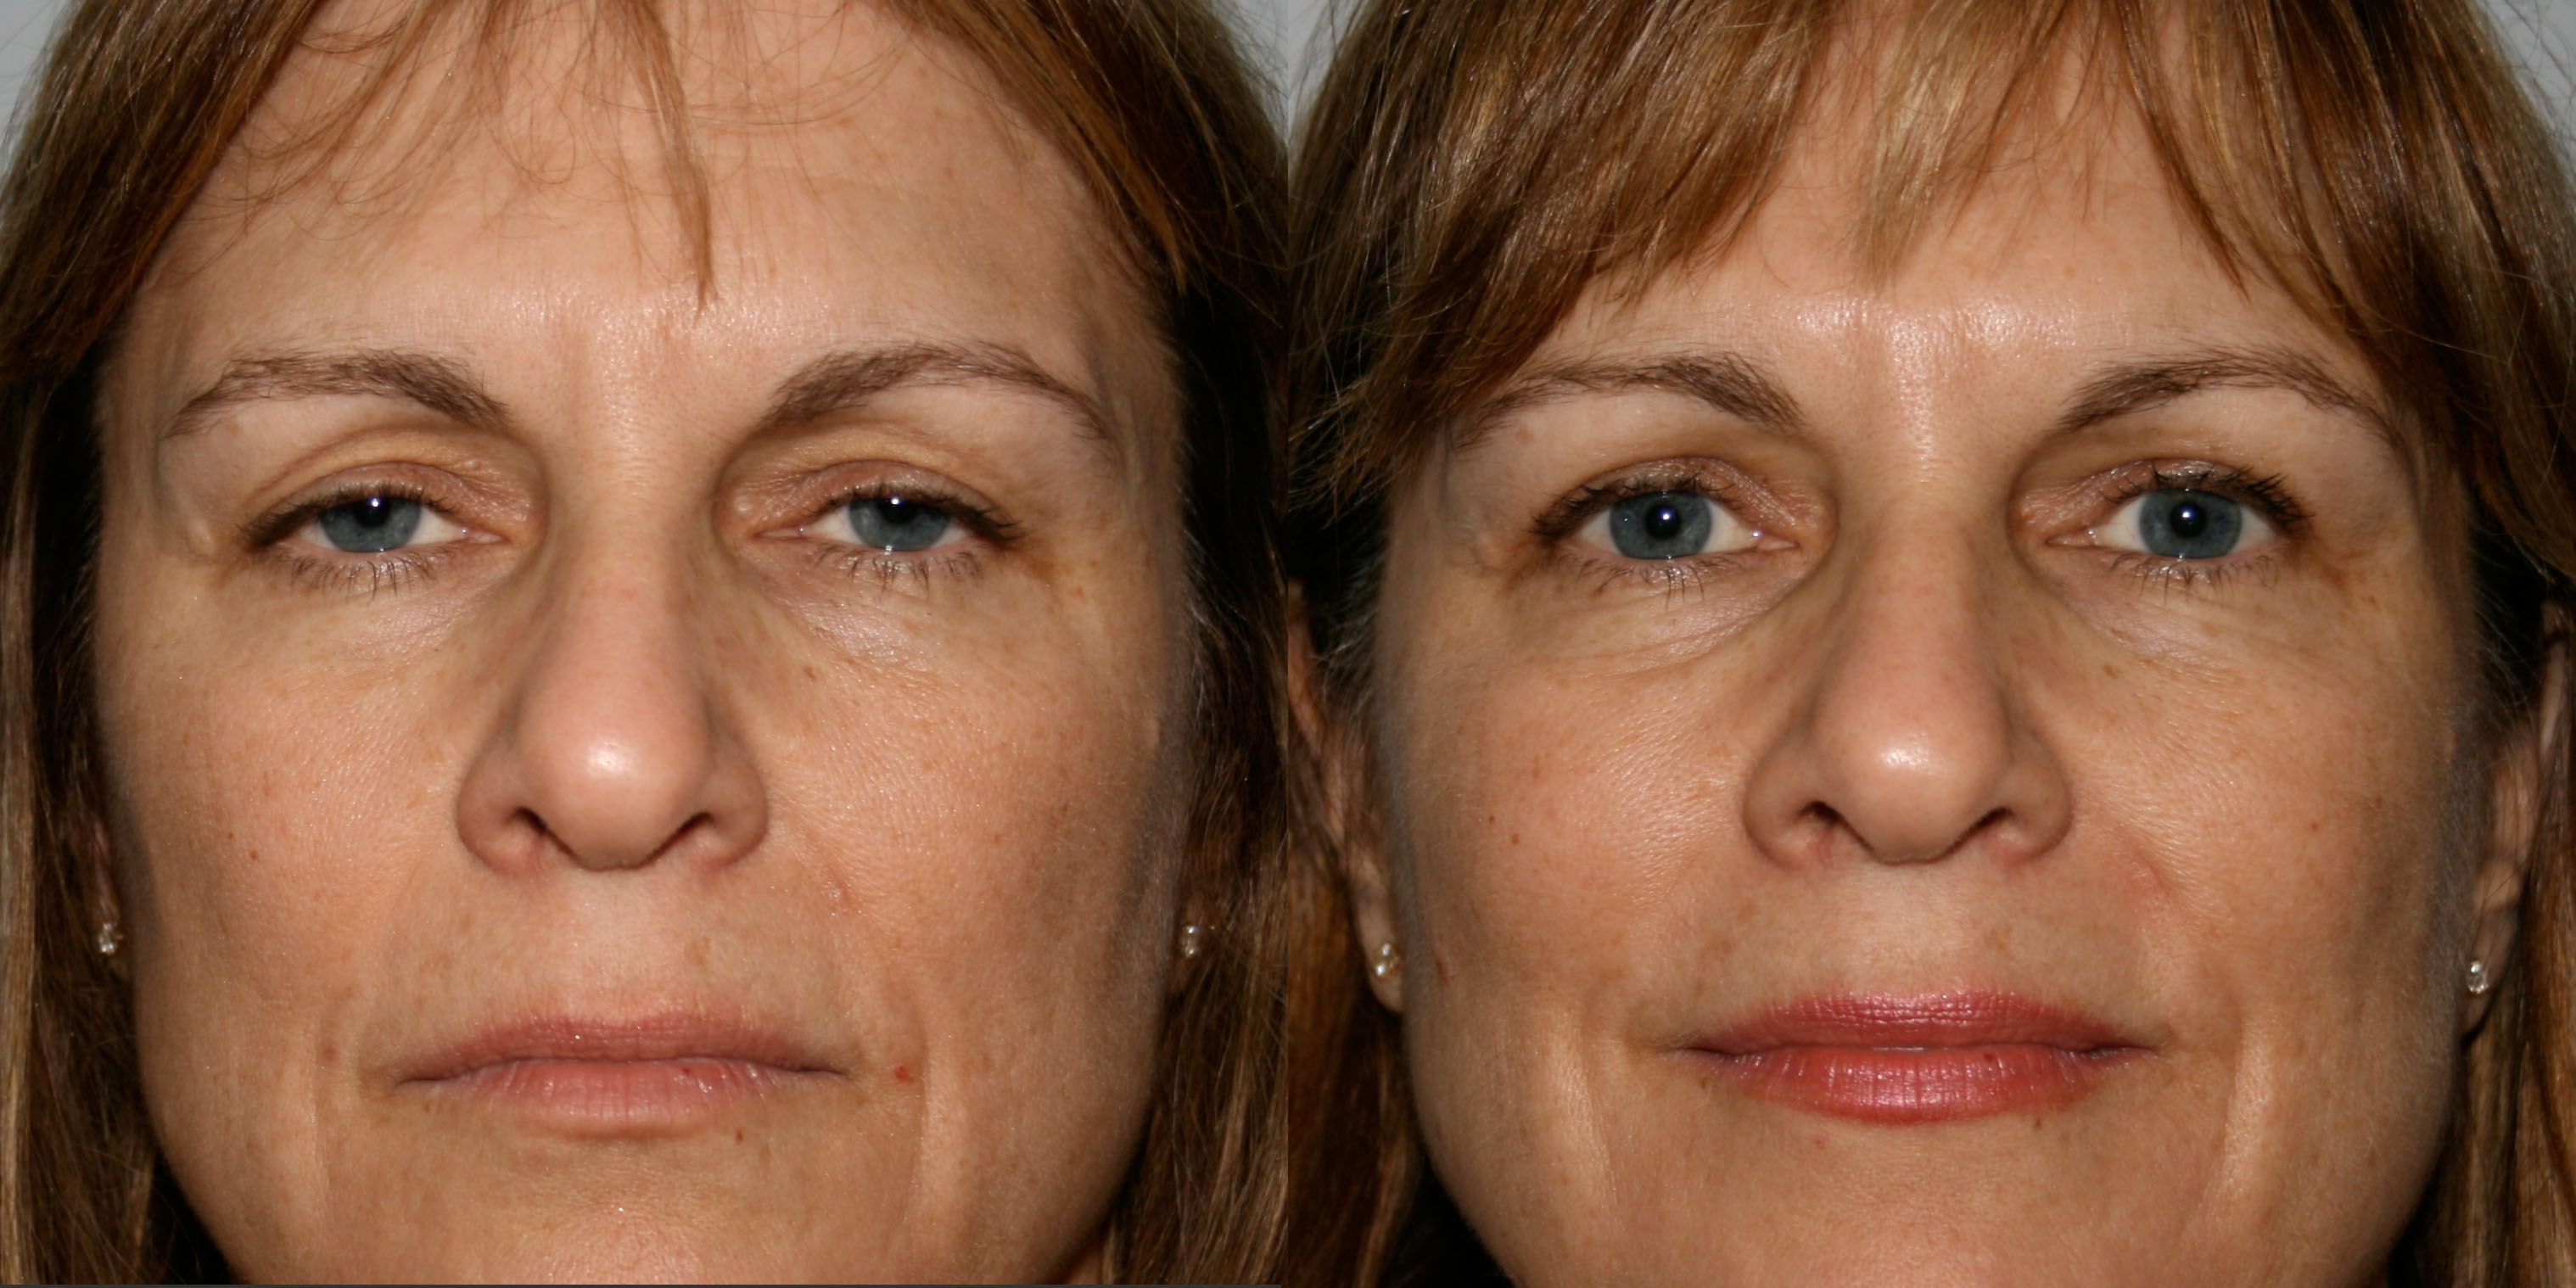 Before and After eyelid lift blepharoplasty photos